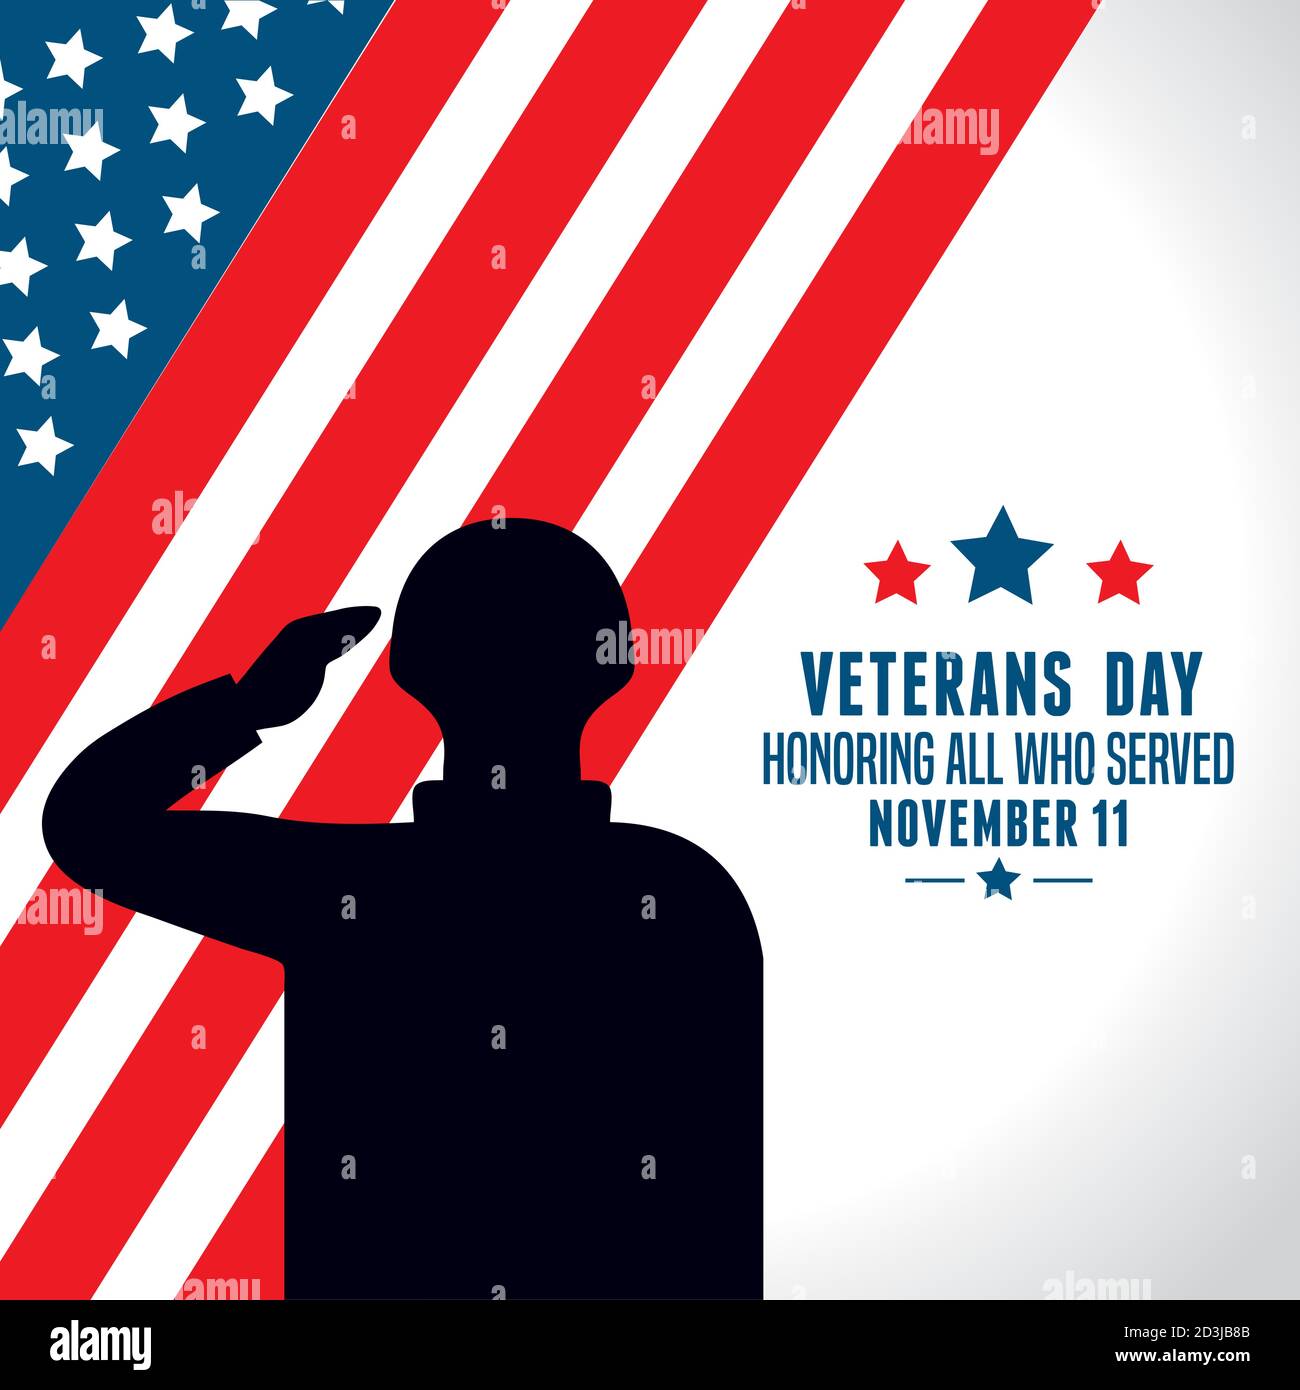 united states of america war veterans day Stock Vector